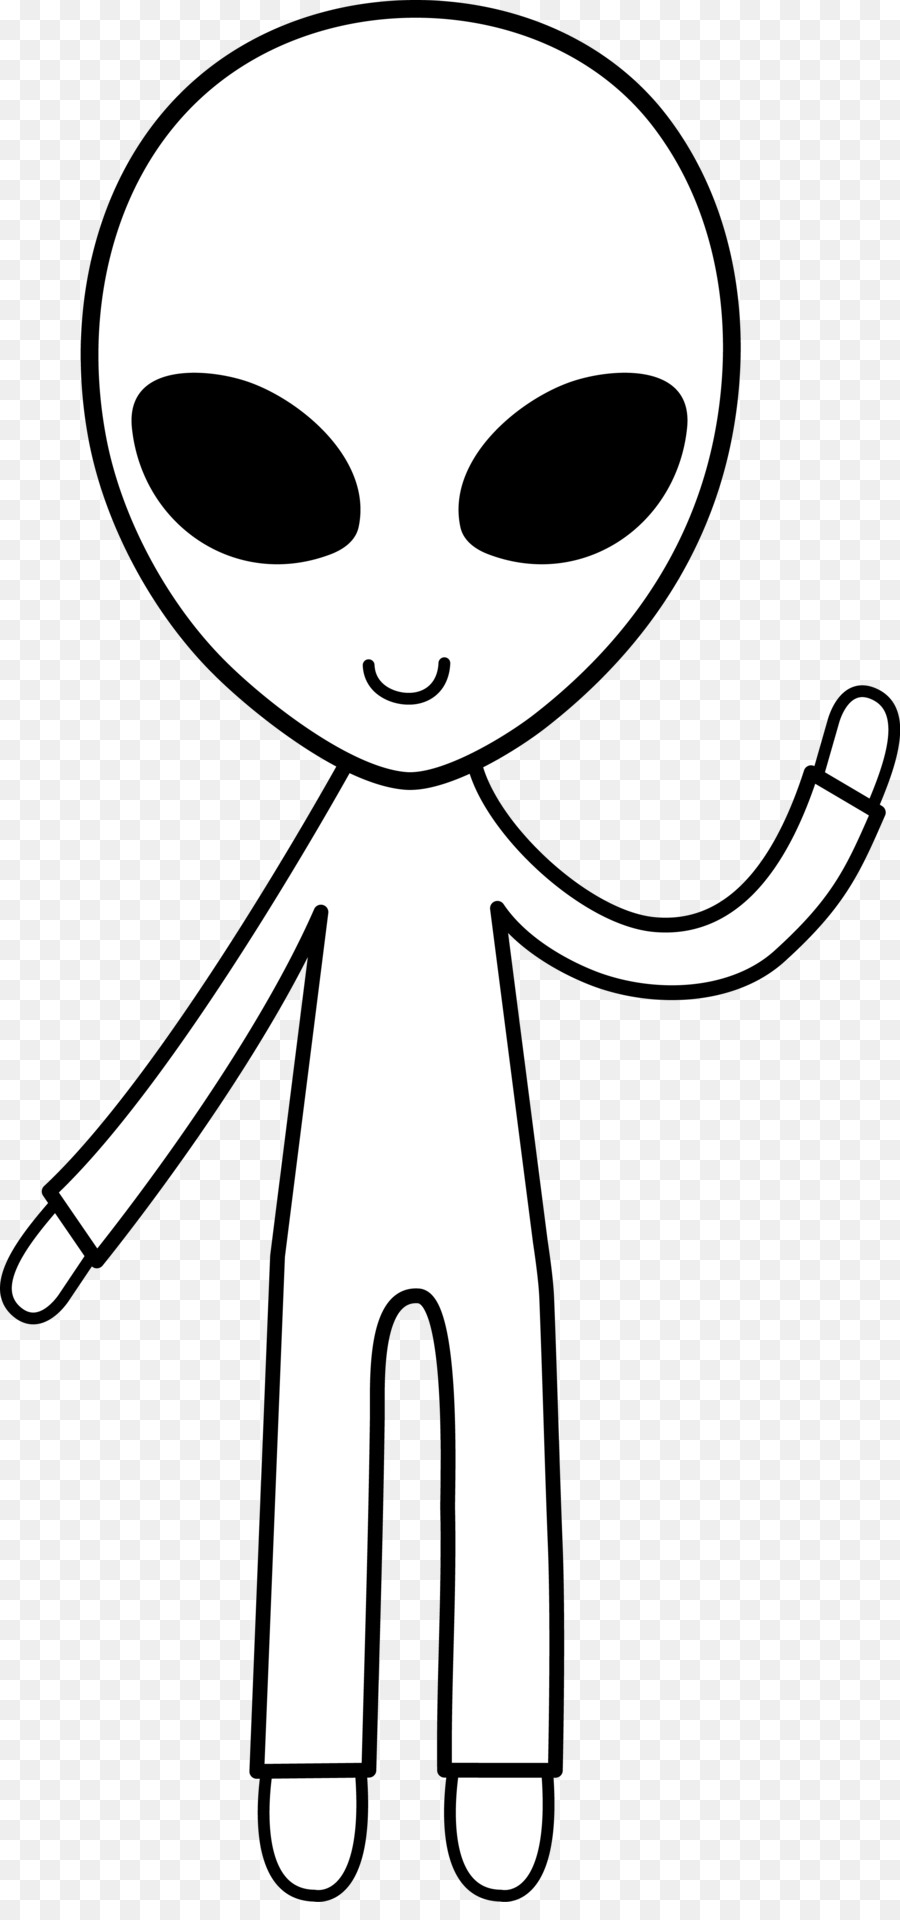 aliens clipart black and white